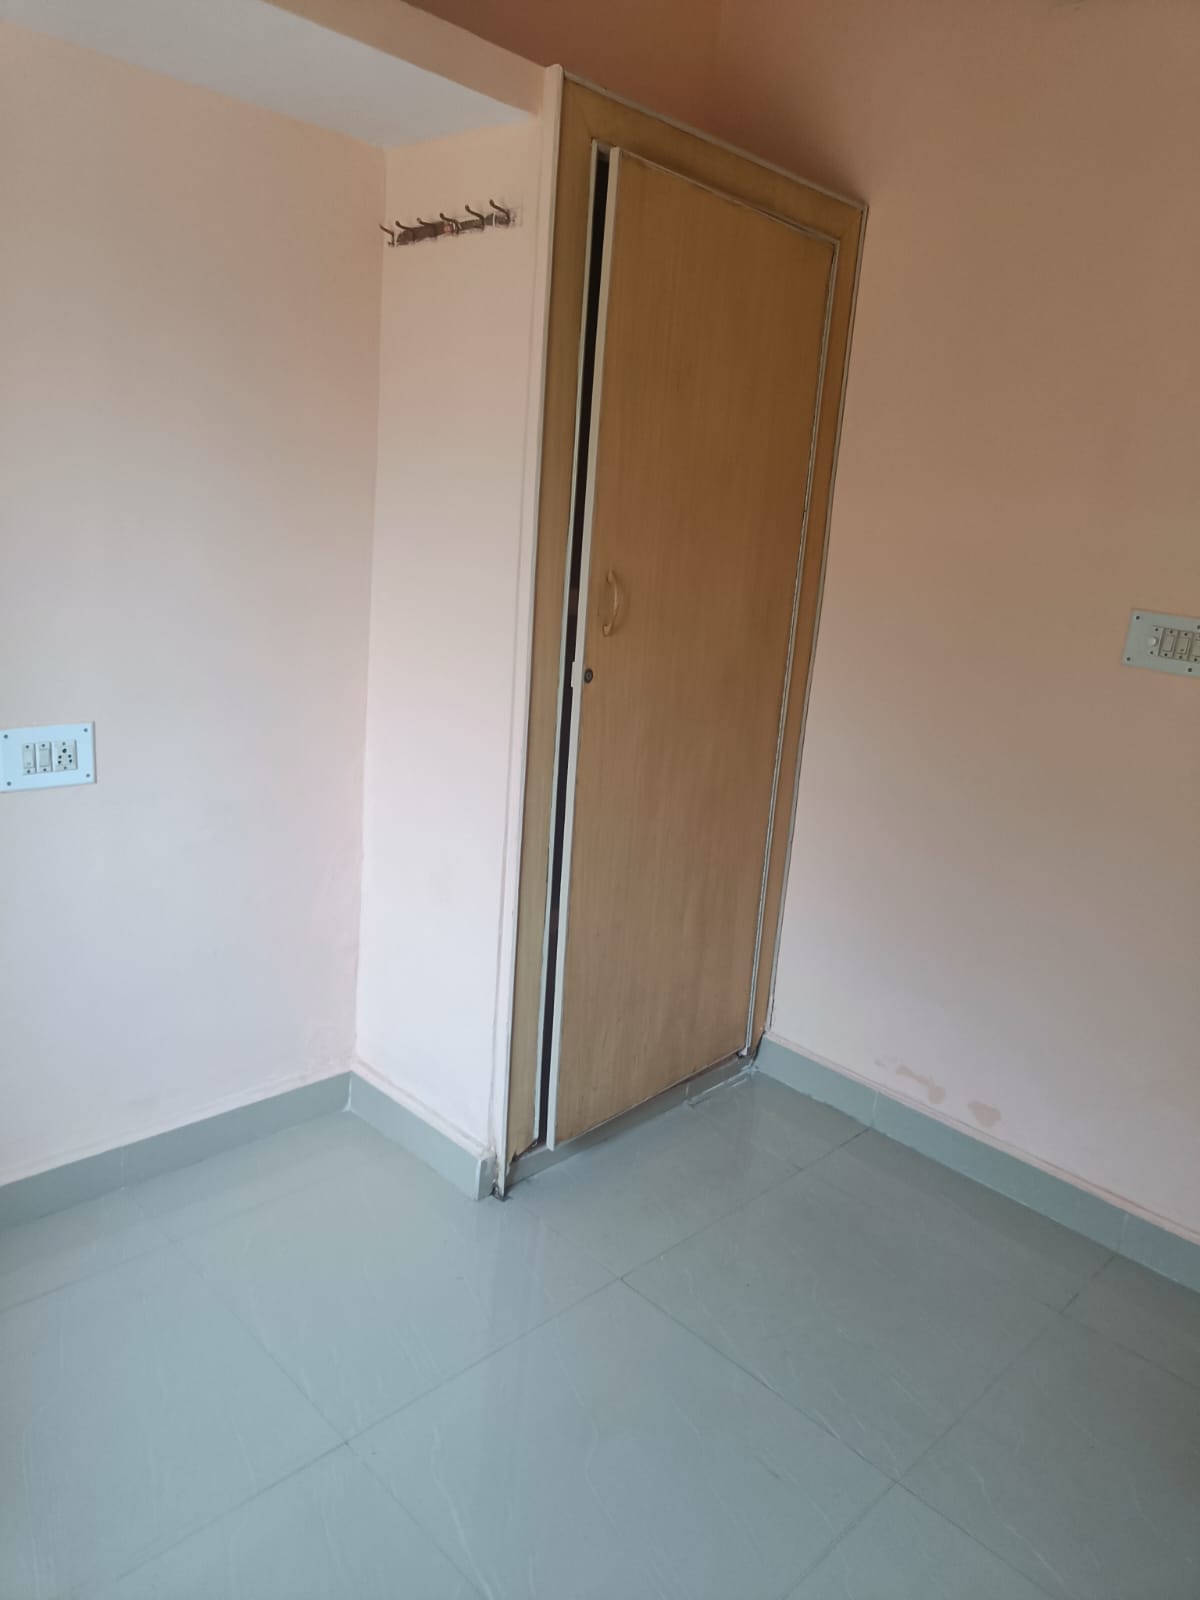 2 BHK Independent House for Lease Only at JAML2 - 4464 in Madiwala